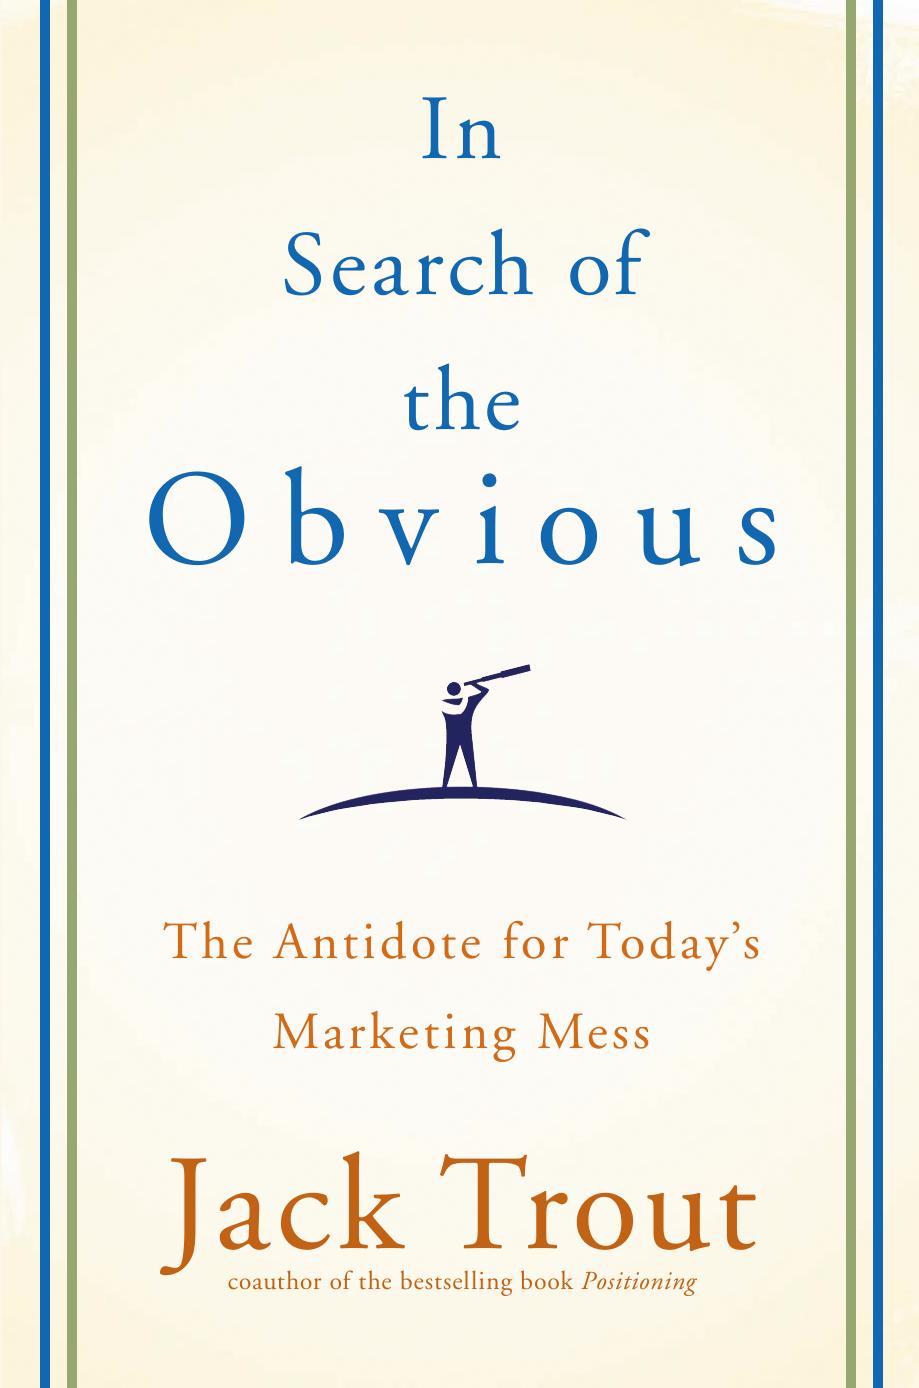 In Search of the Obvious: The Antidote for Today's Marketing Mess